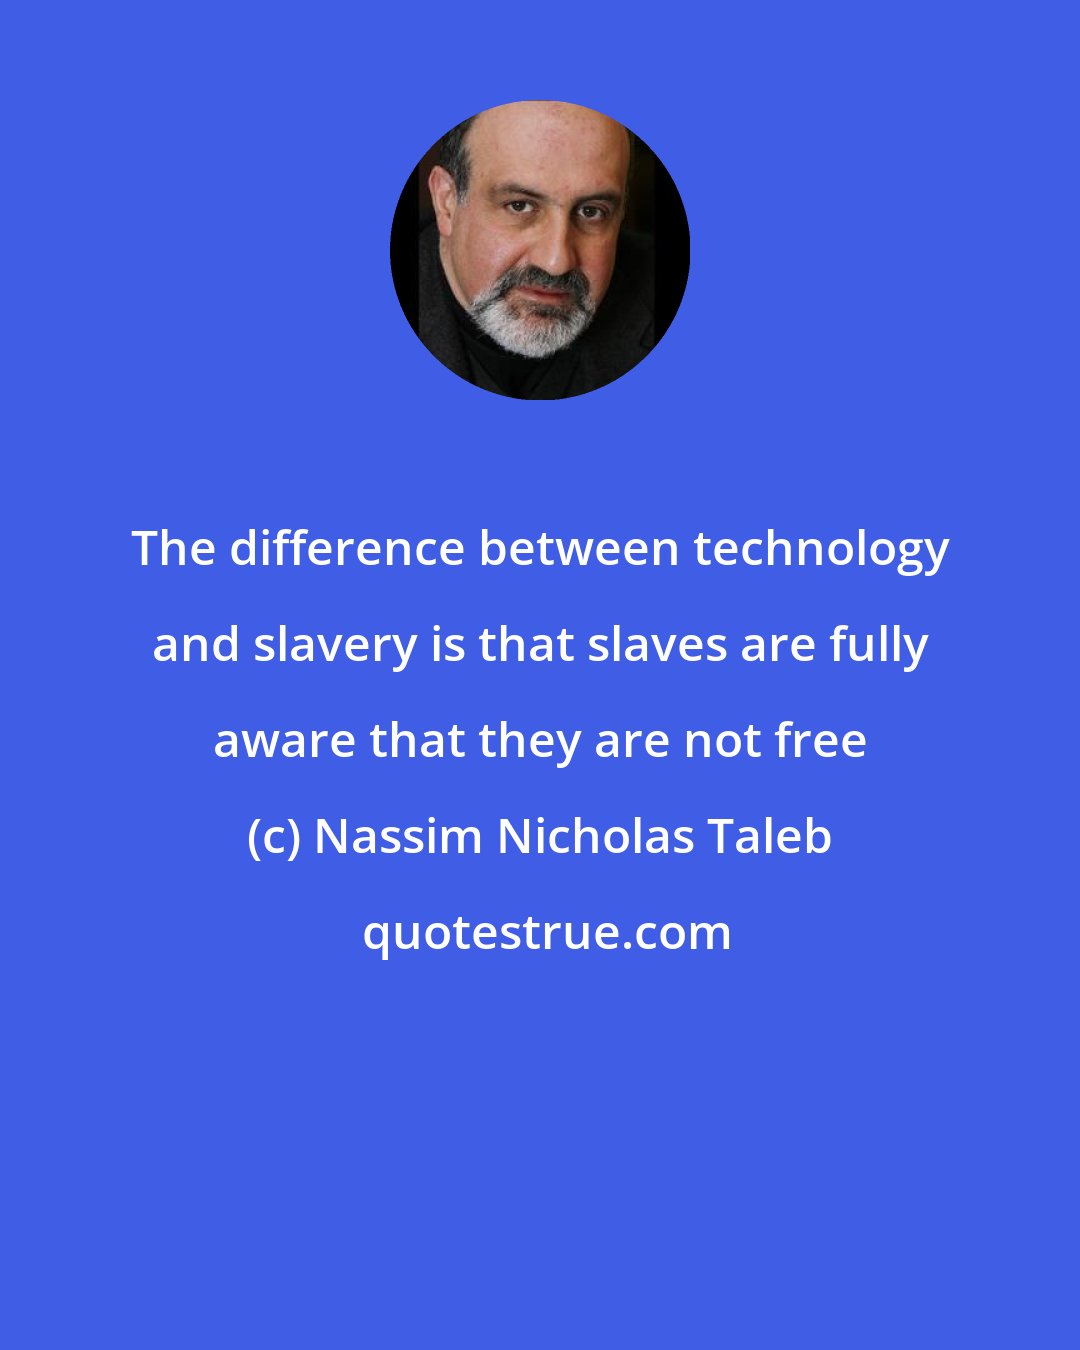 Nassim Nicholas Taleb: The difference between technology and slavery is that slaves are fully aware that they are not free